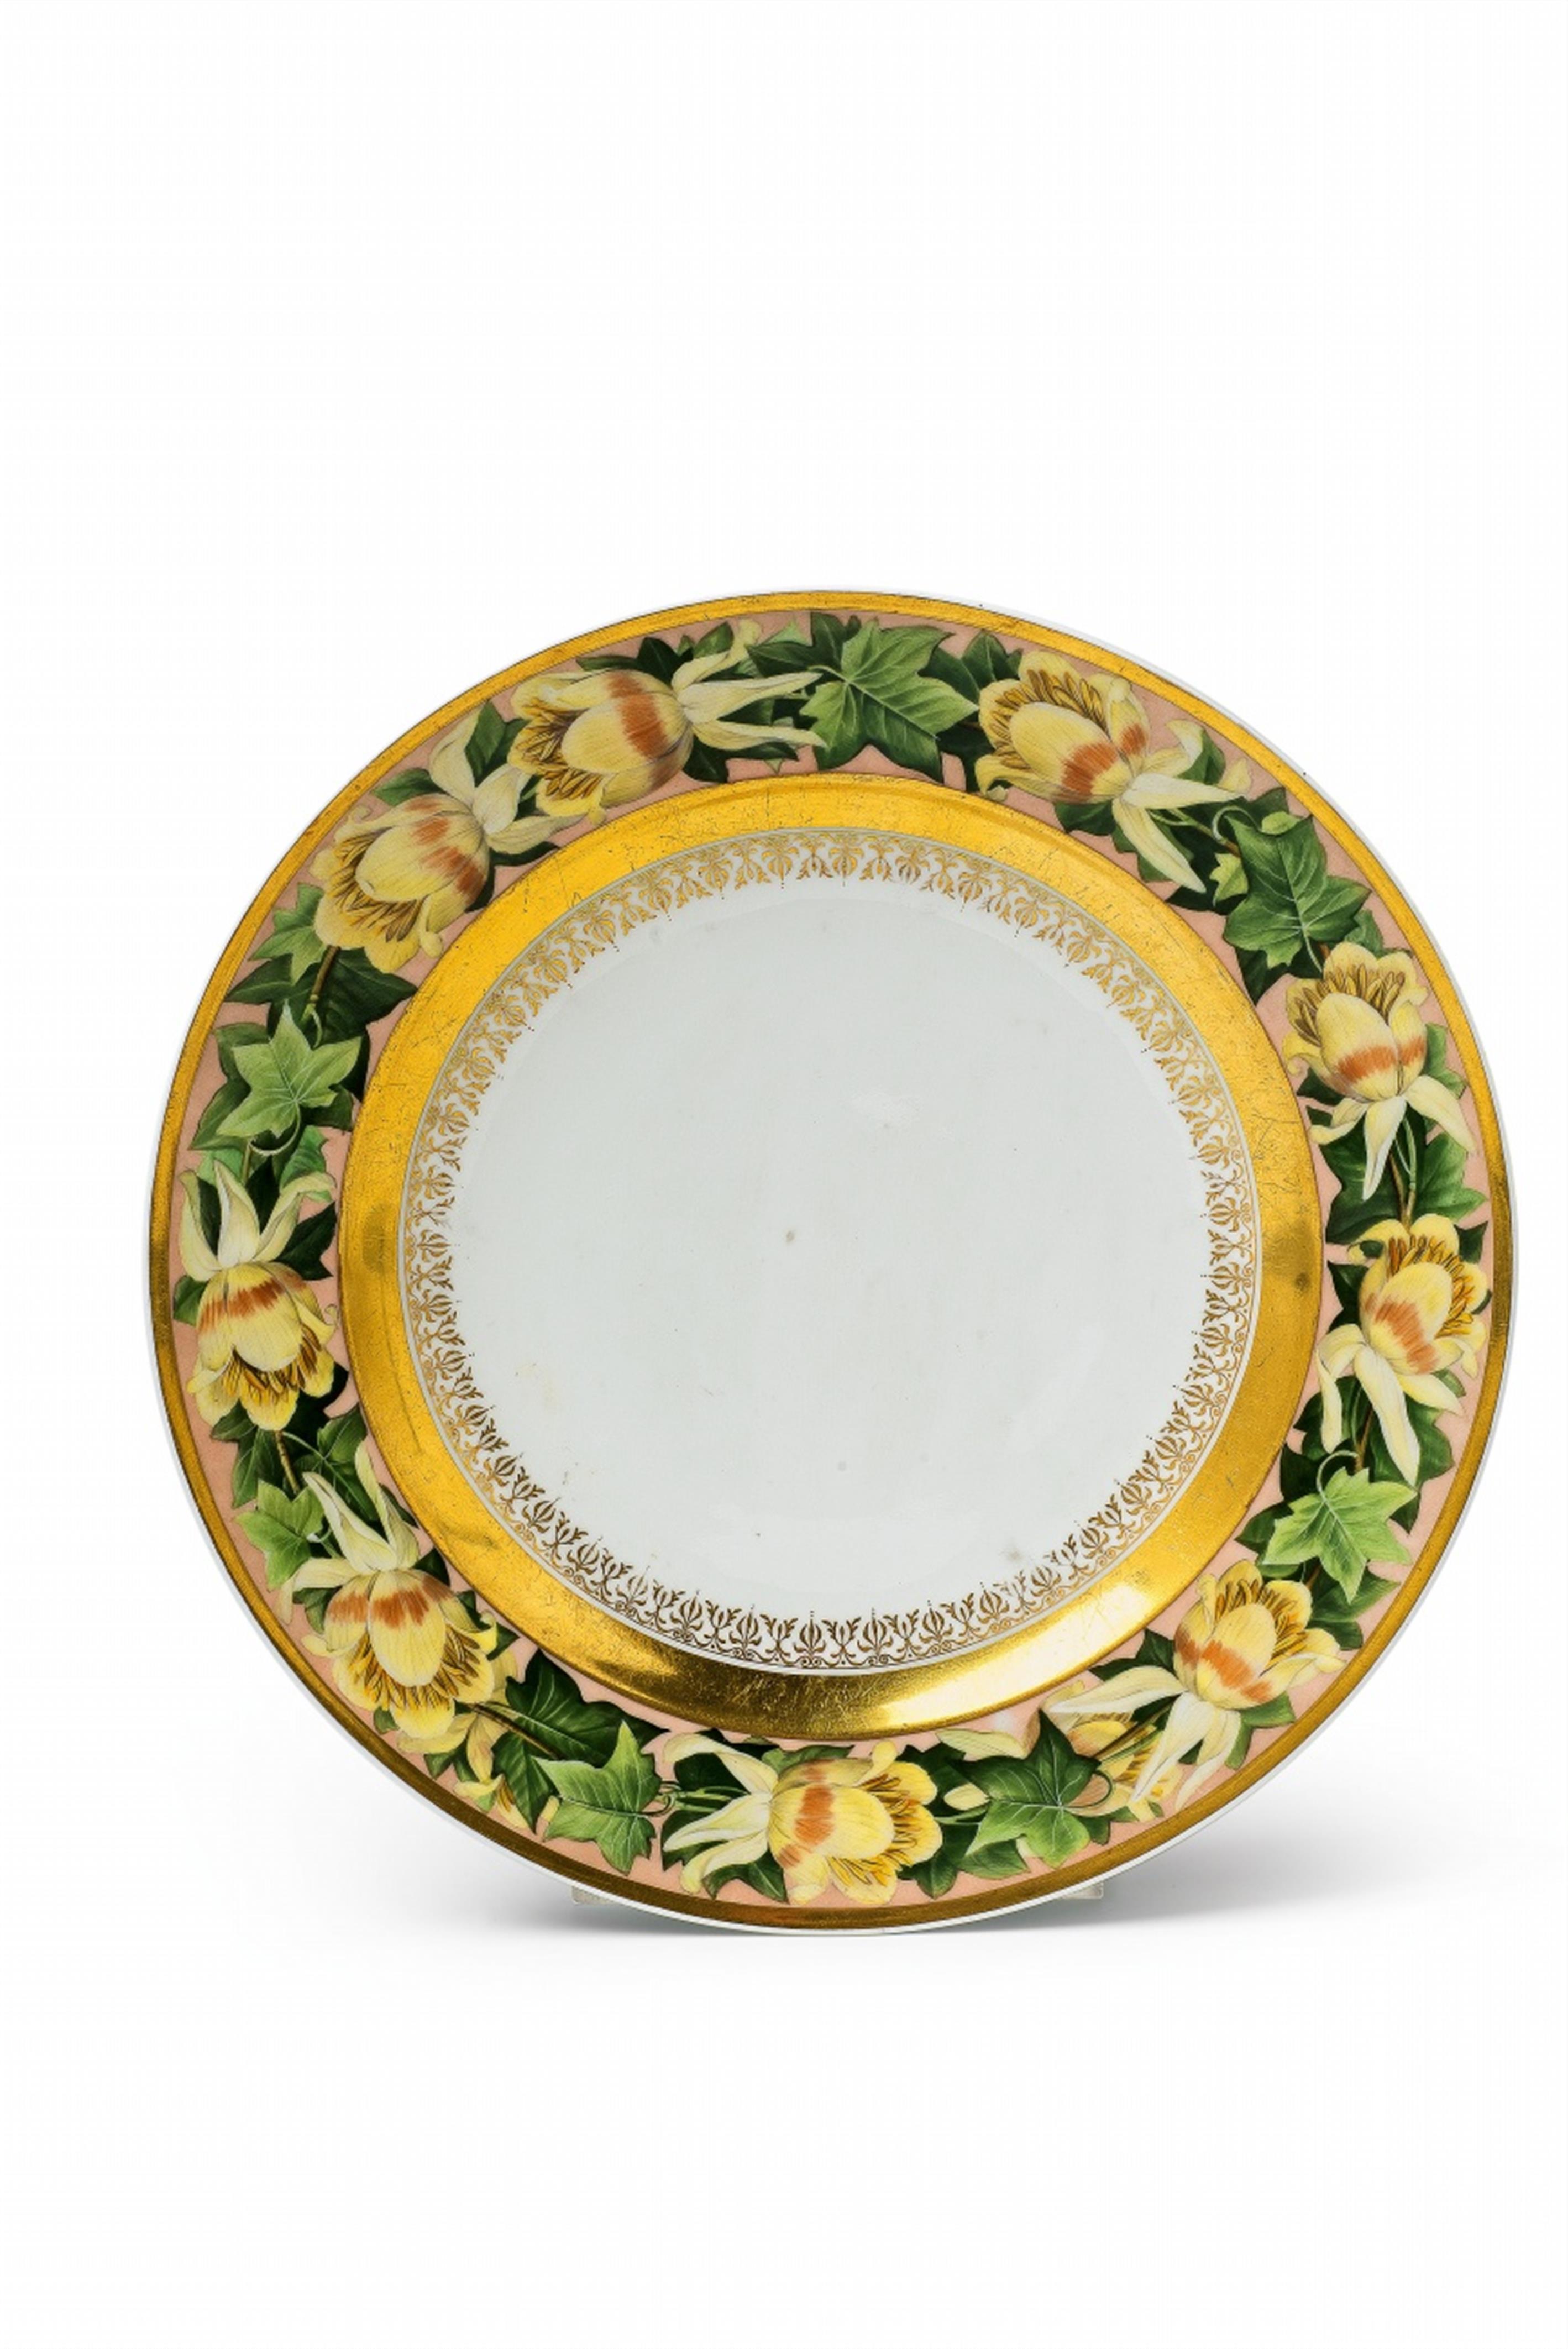 A Berlin KPM porcelain plate with a floral wreath from the wedding service of Princess Louise - image-1